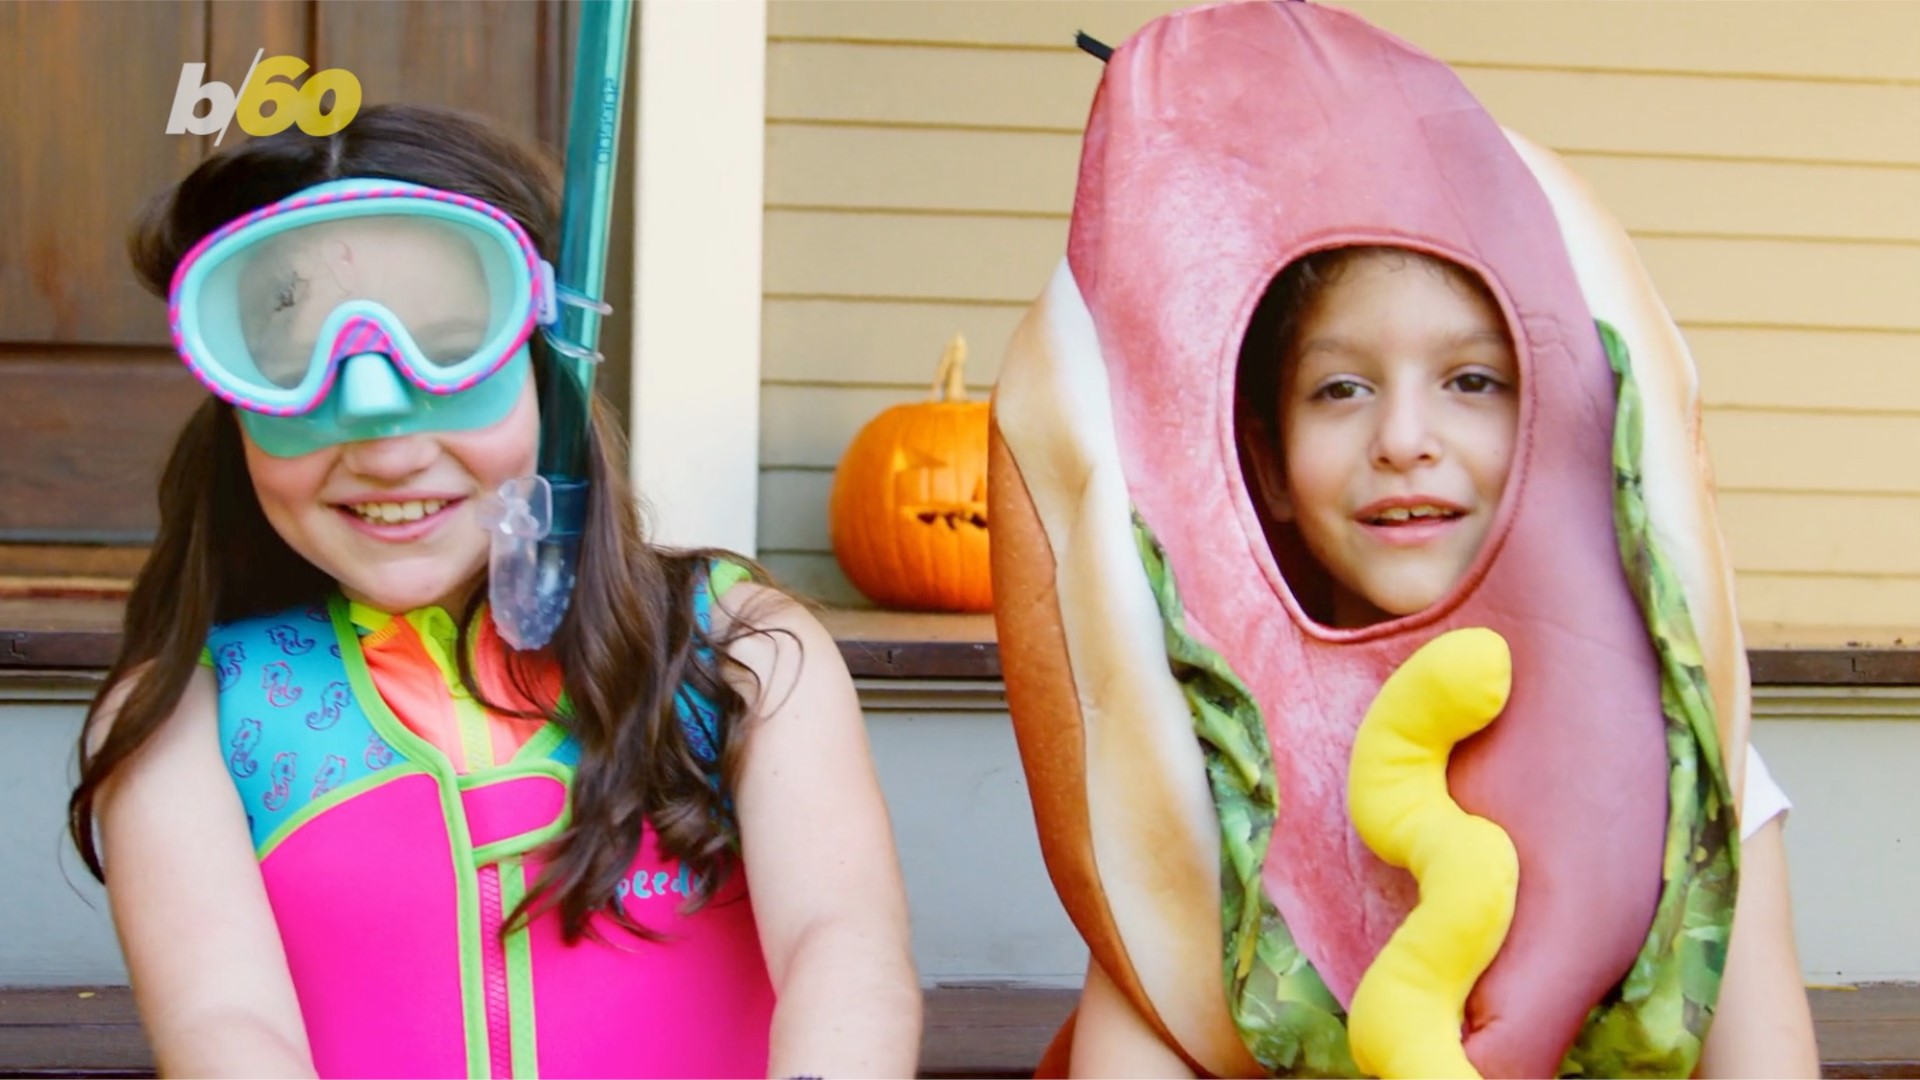 If you are a foodie who also wants candy, these costumes might be just the thing for you. Buzz60's Keri Lumm shares some of her favorites.